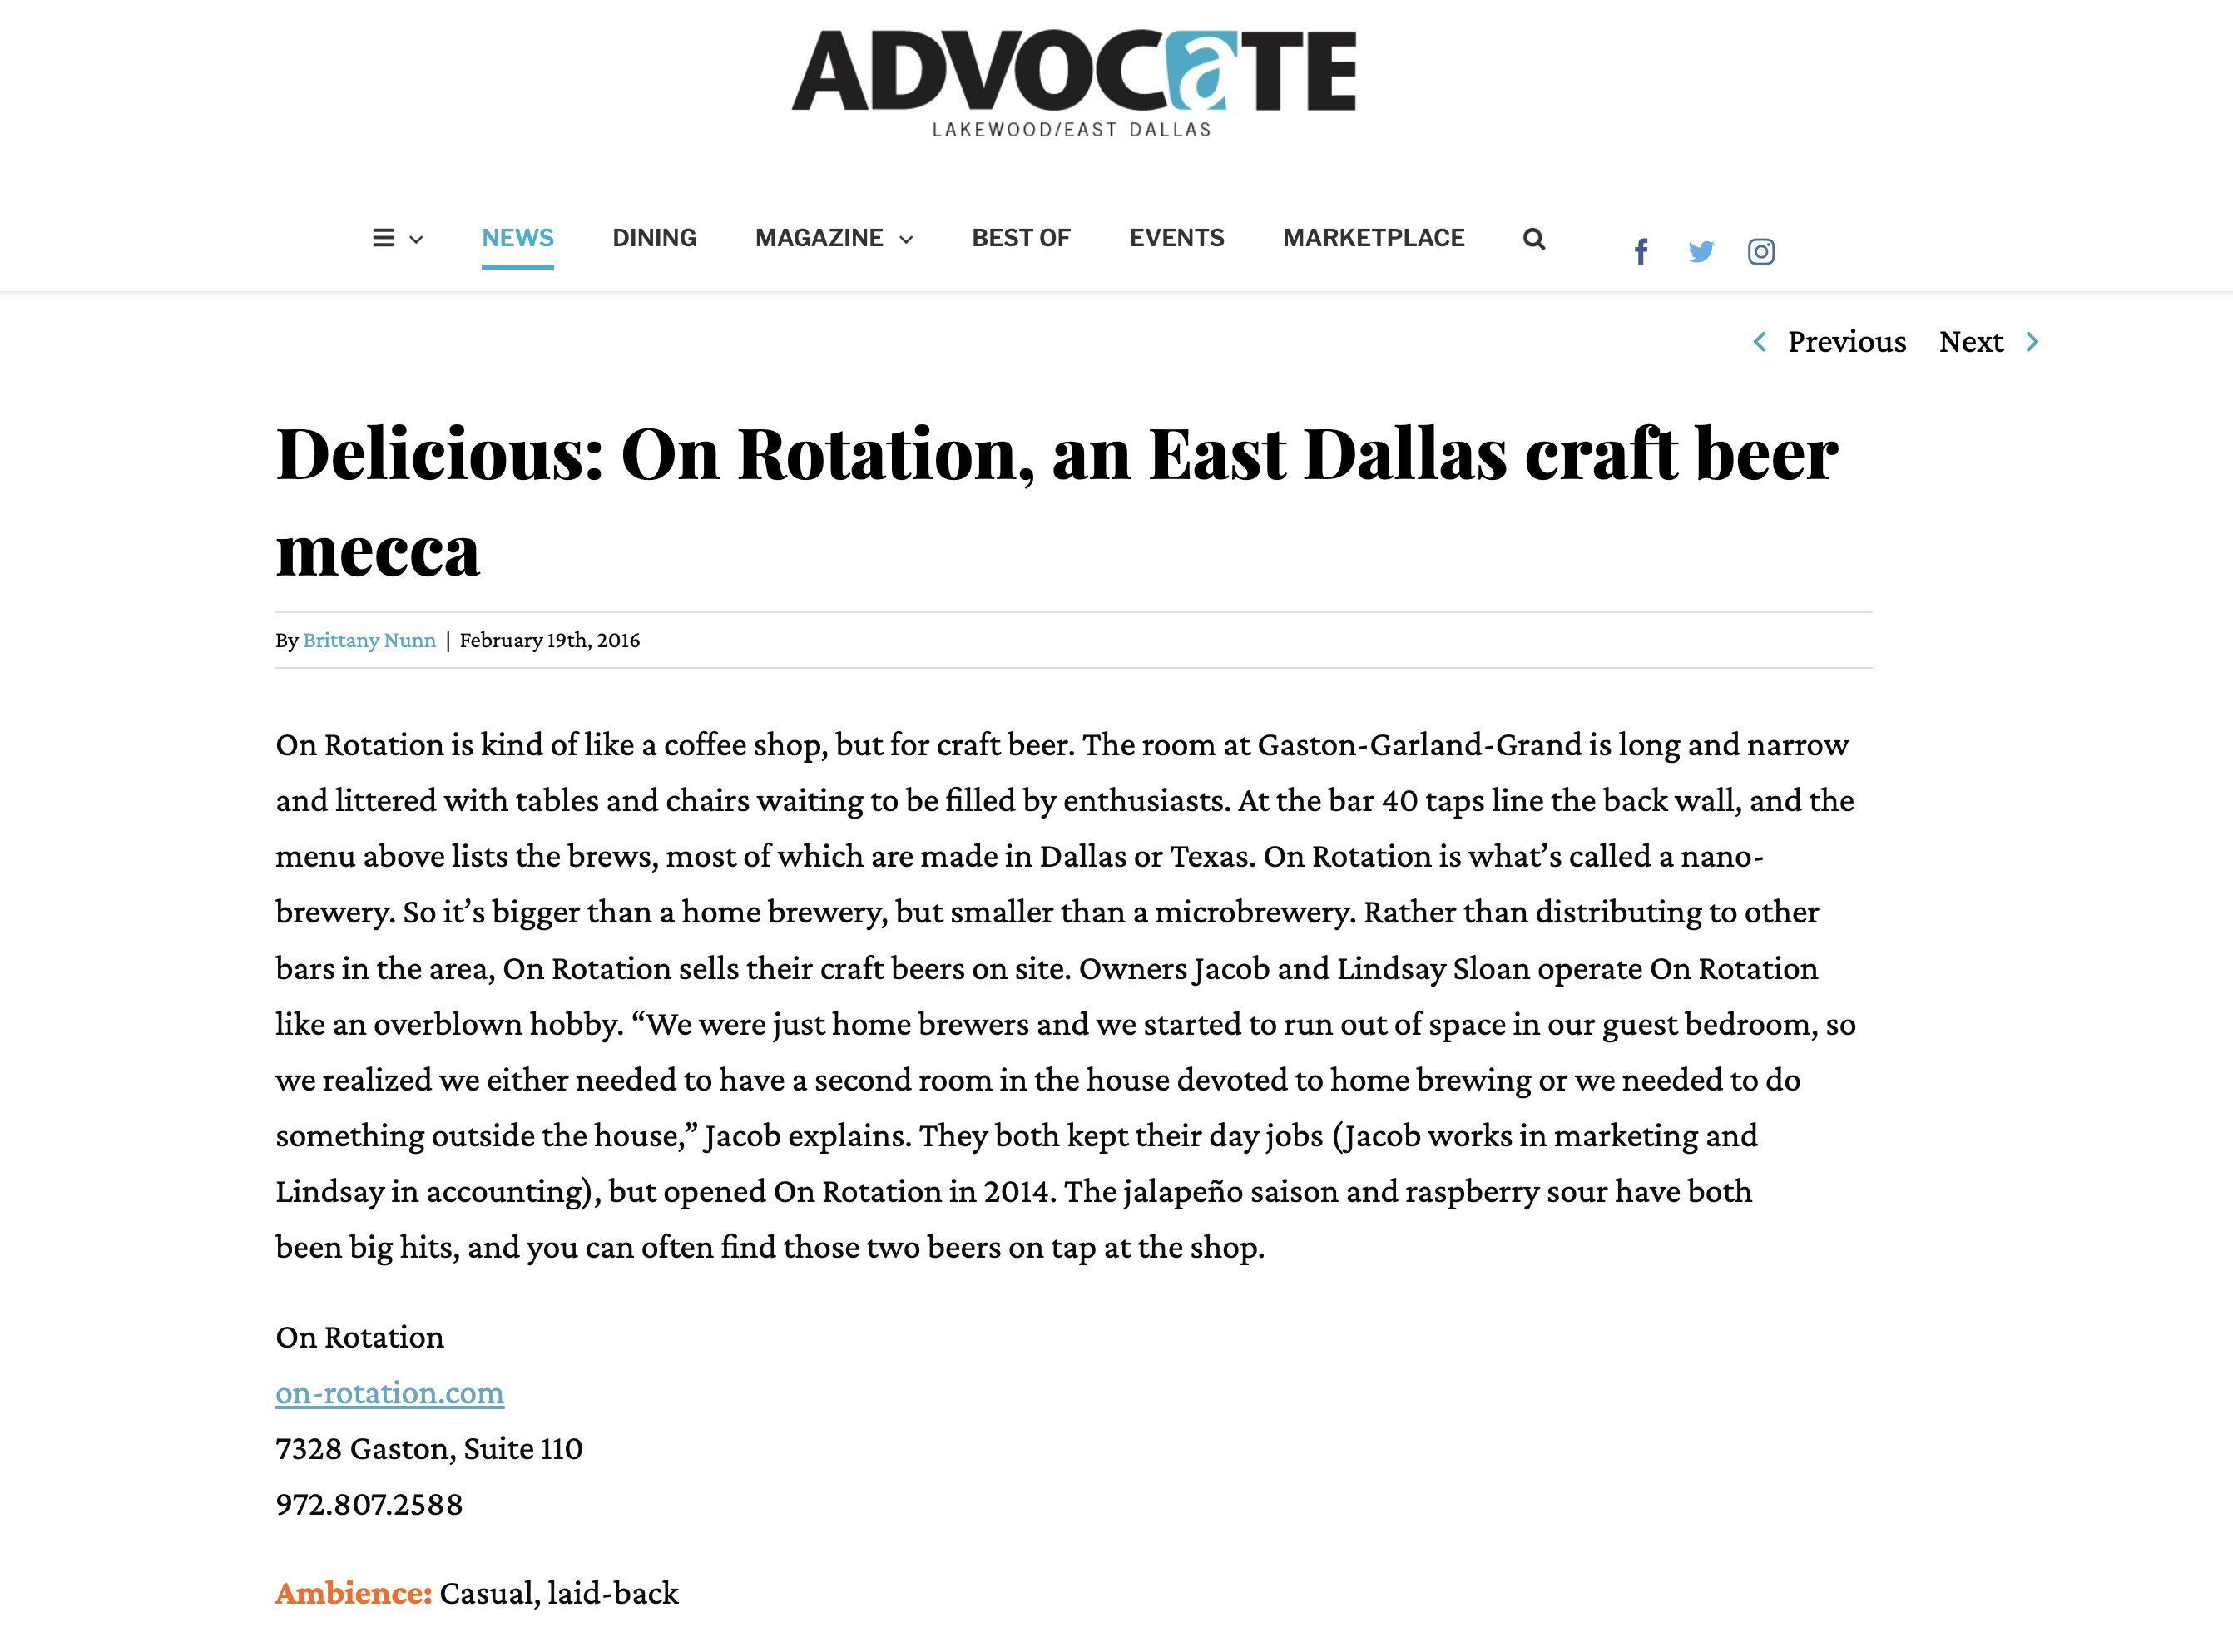 Craft beer mecca in Lakewood Advocate